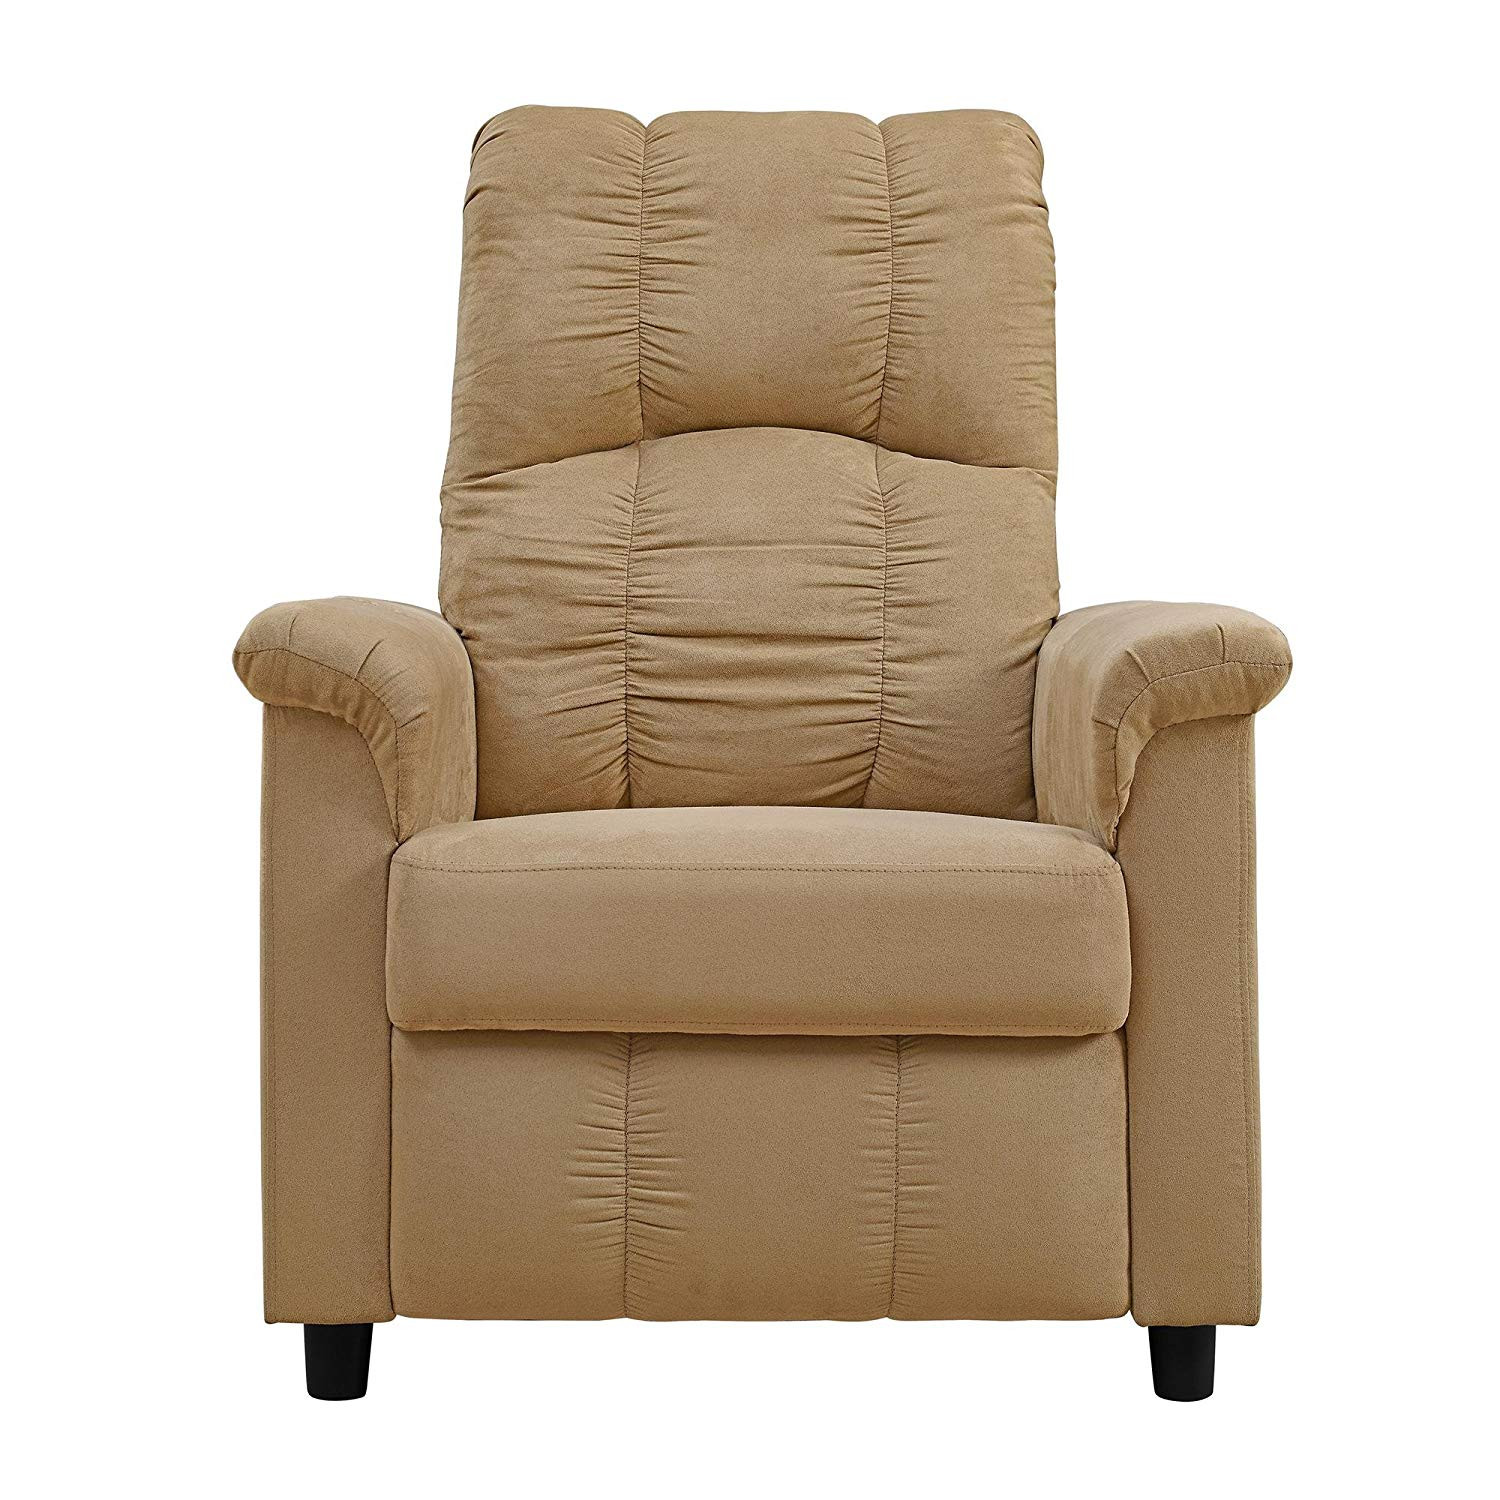 Small Recliners For Bedroom
 Top 10 Small Recliners for Bedroom 2019 Reviews & Guide